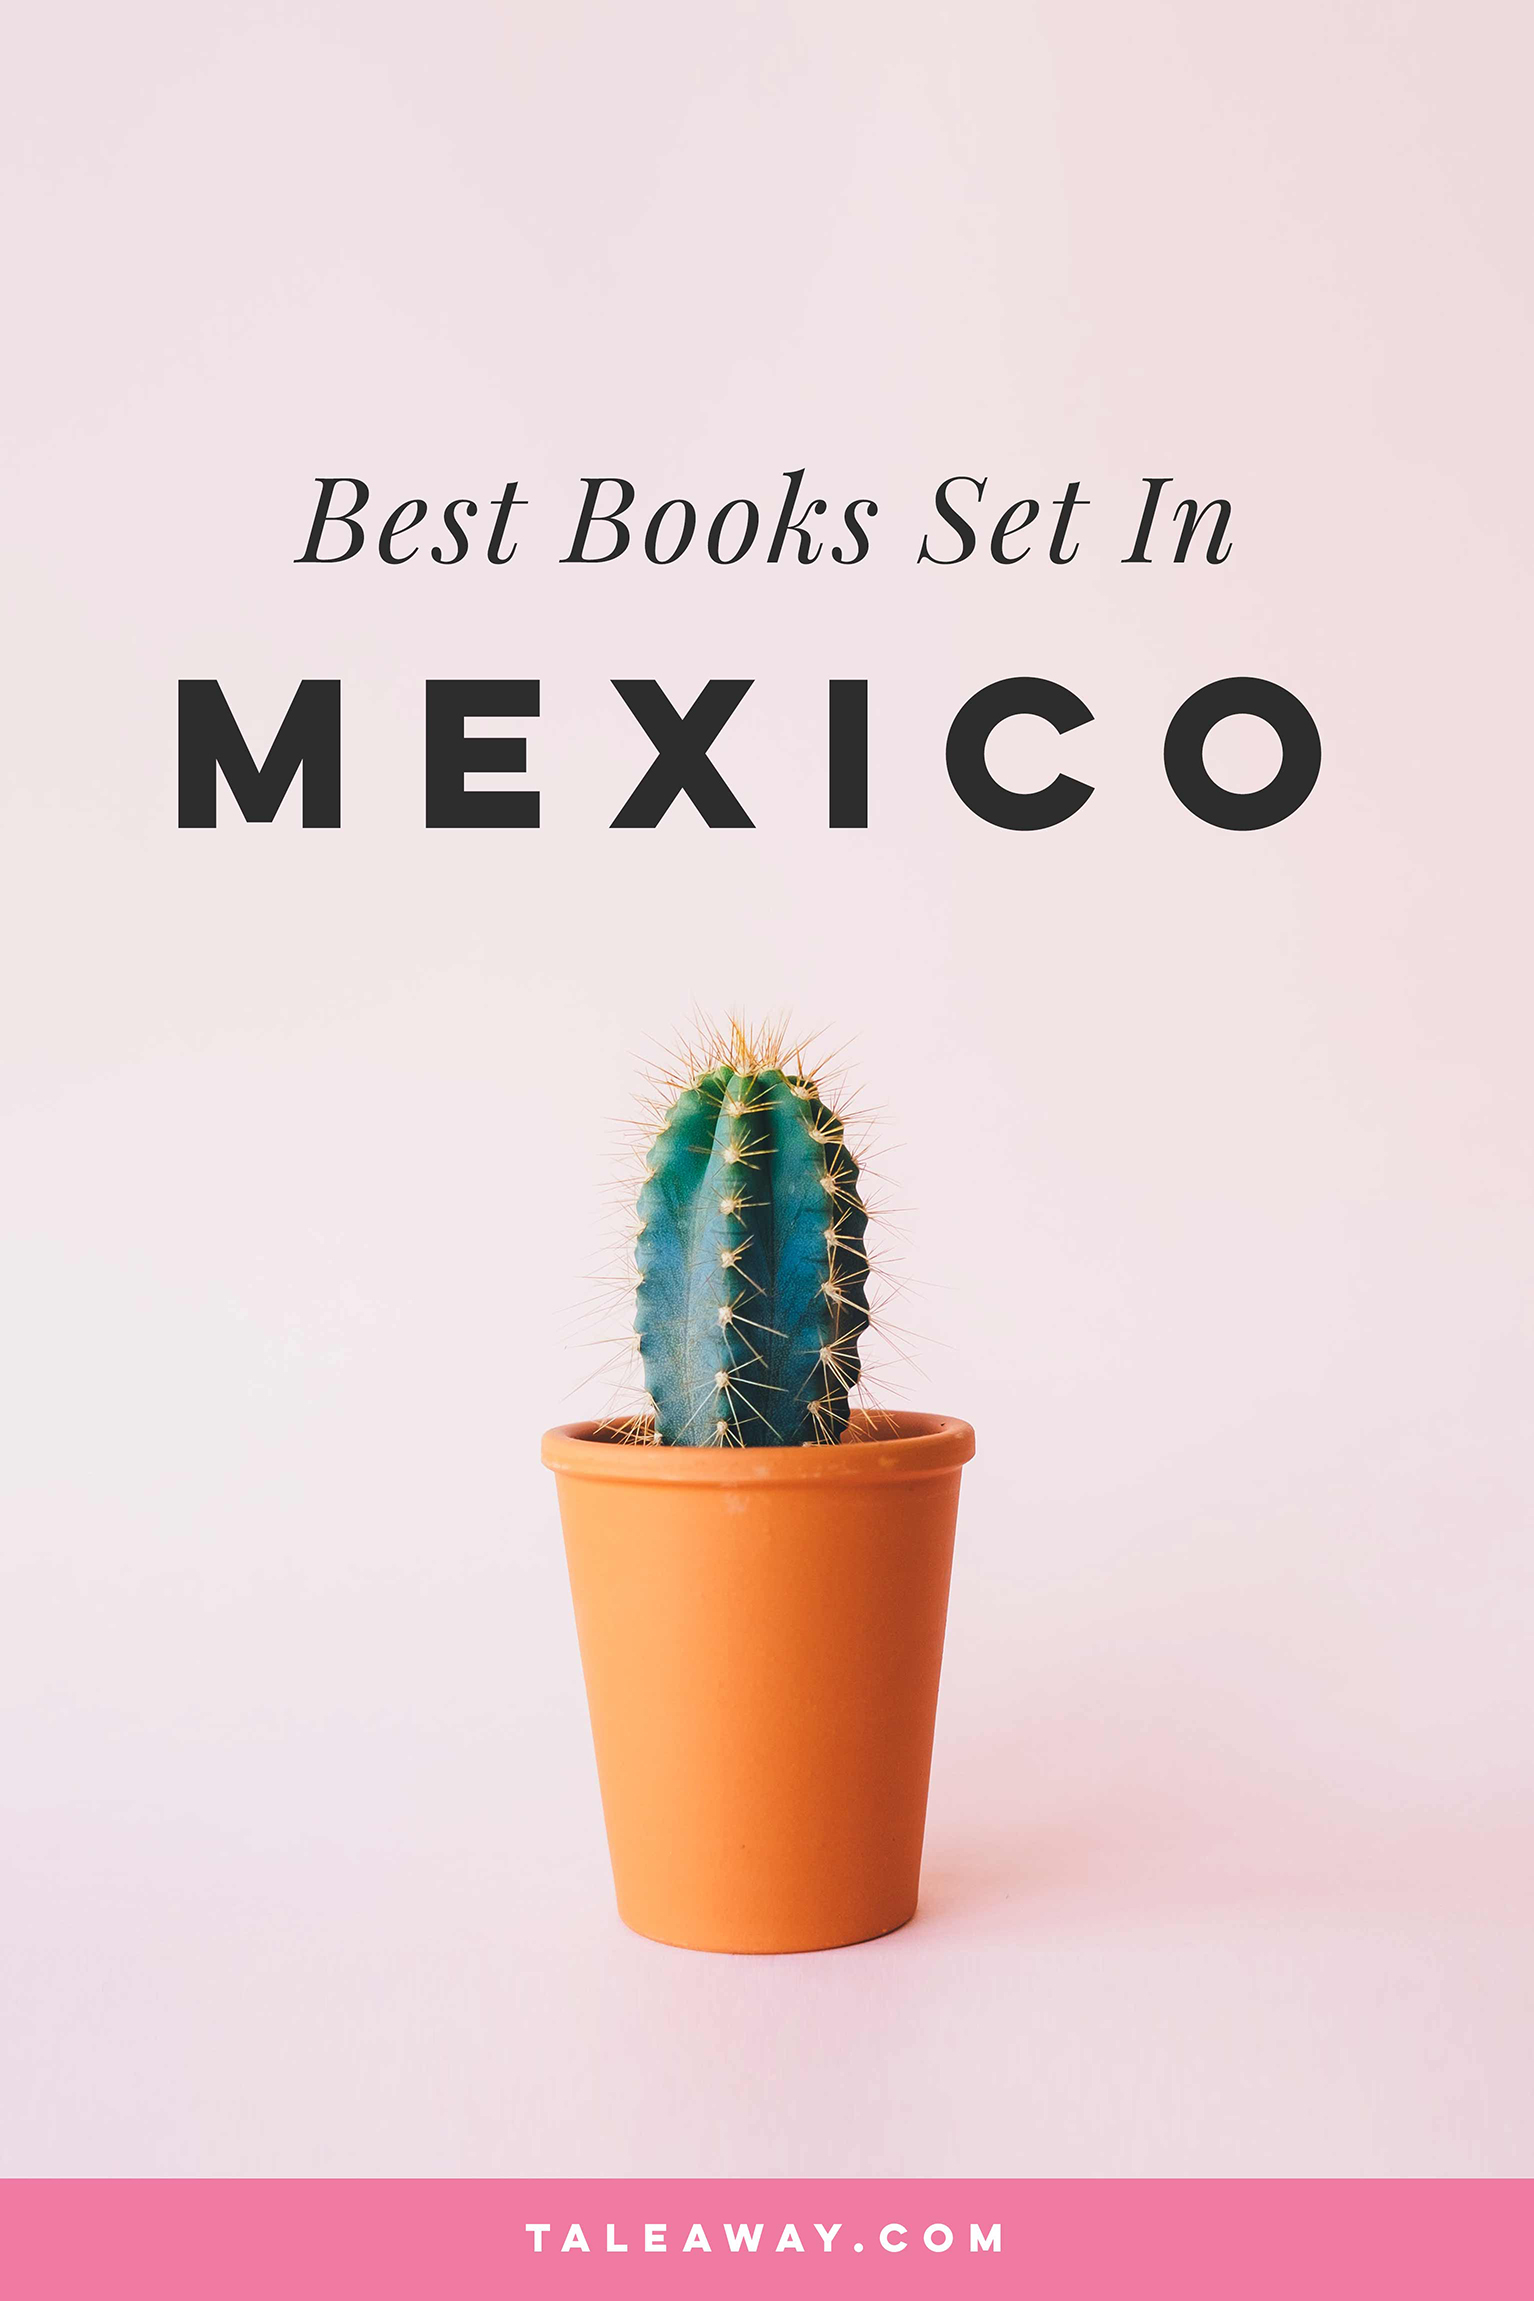 Books Set In Mexico. Mexican books that inspire travel, visit www.taleway.com for books set around the world. mexican books, books about mexico, mexico inspiration, mexico travel, novels set in mexico, mexican novels, books and travel, travel reads, reading list, books around the world, books to read, mexico, books set in different countries